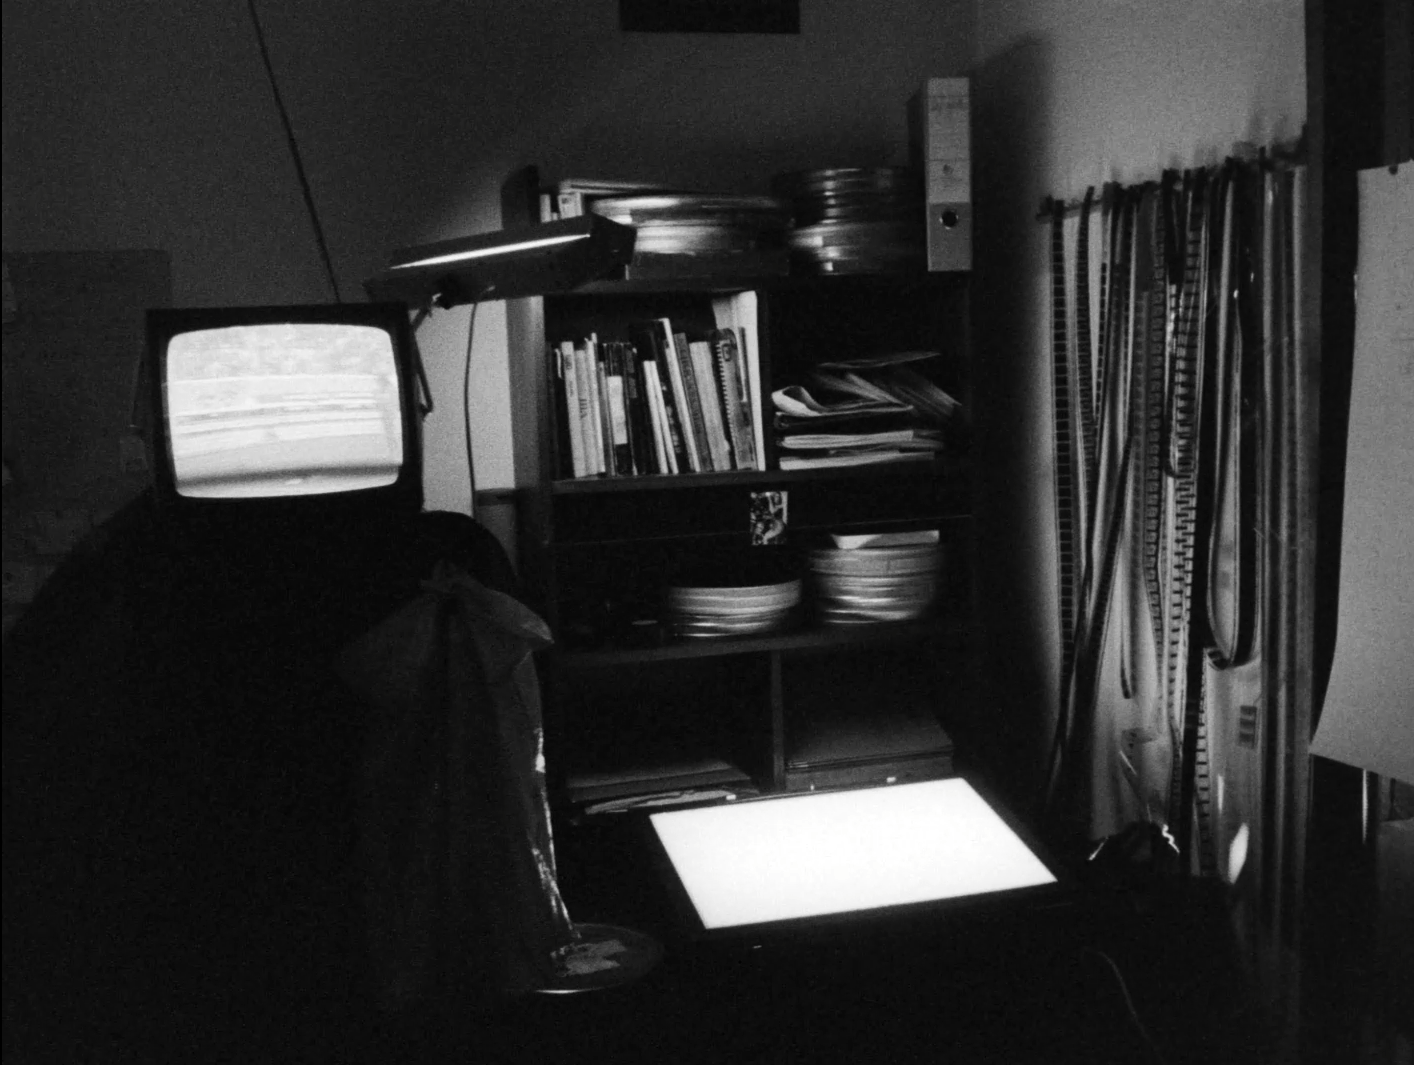 black and white film still depicting the corner of an artist's studio with film reels and books filed on a shelf, loose film hanging on the wall, a light table and a fuzzy CRT TV